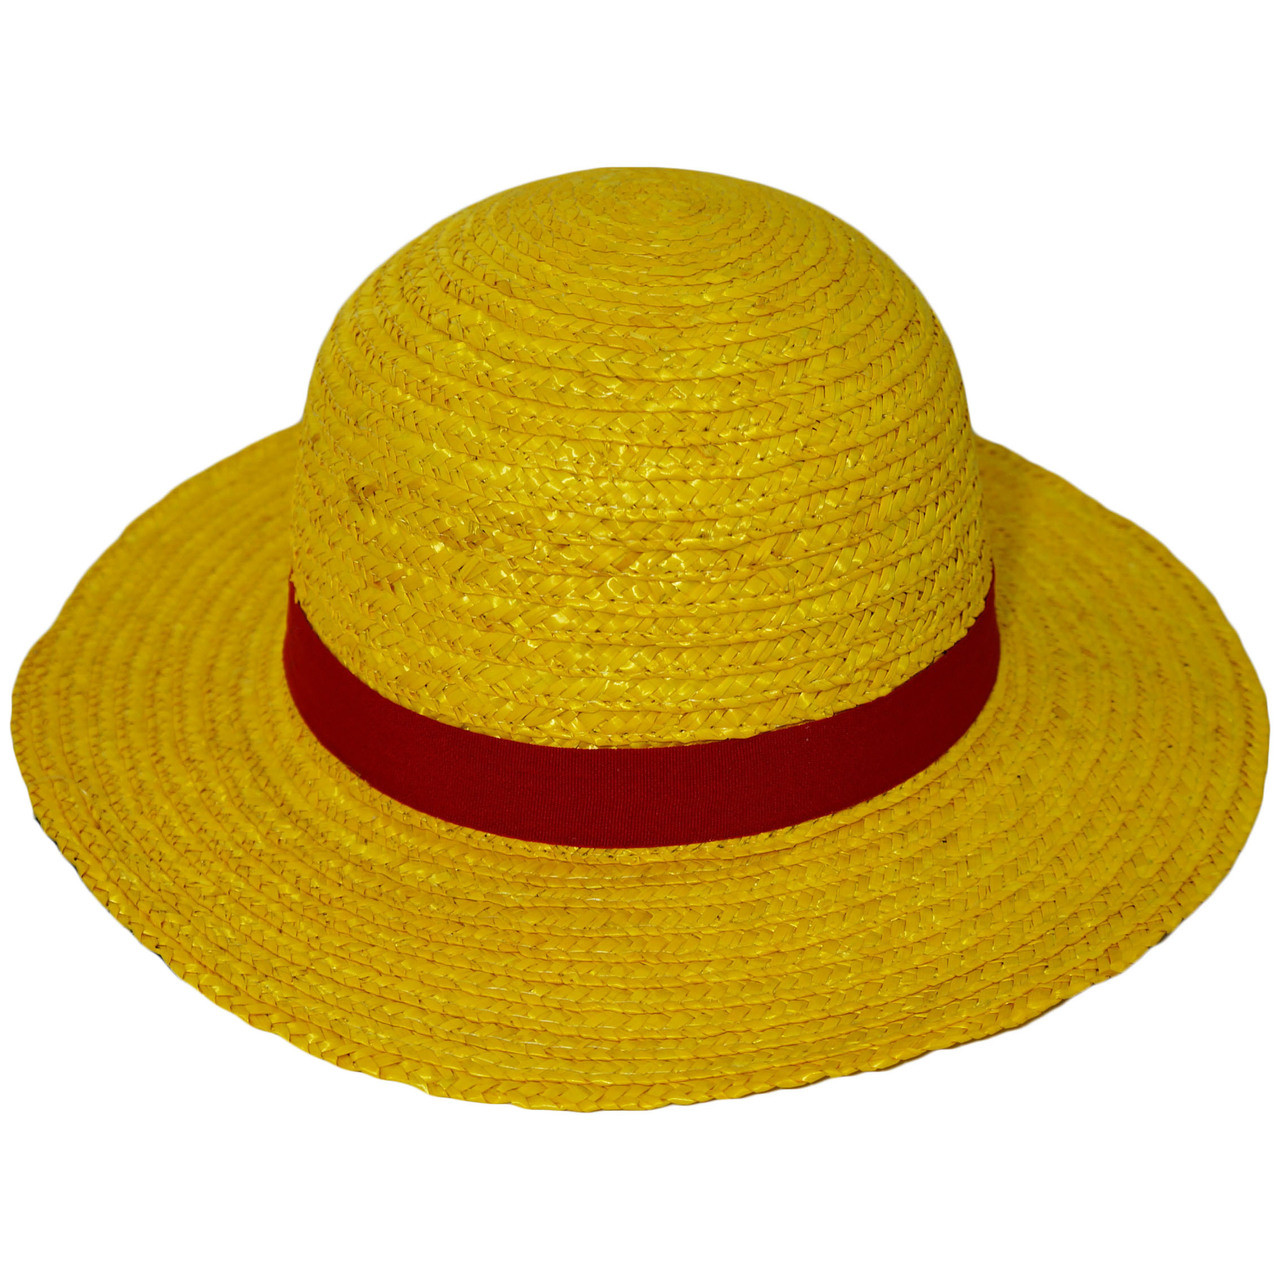 One Piece: Luffy Straw Cosplay Hat - Circle Red